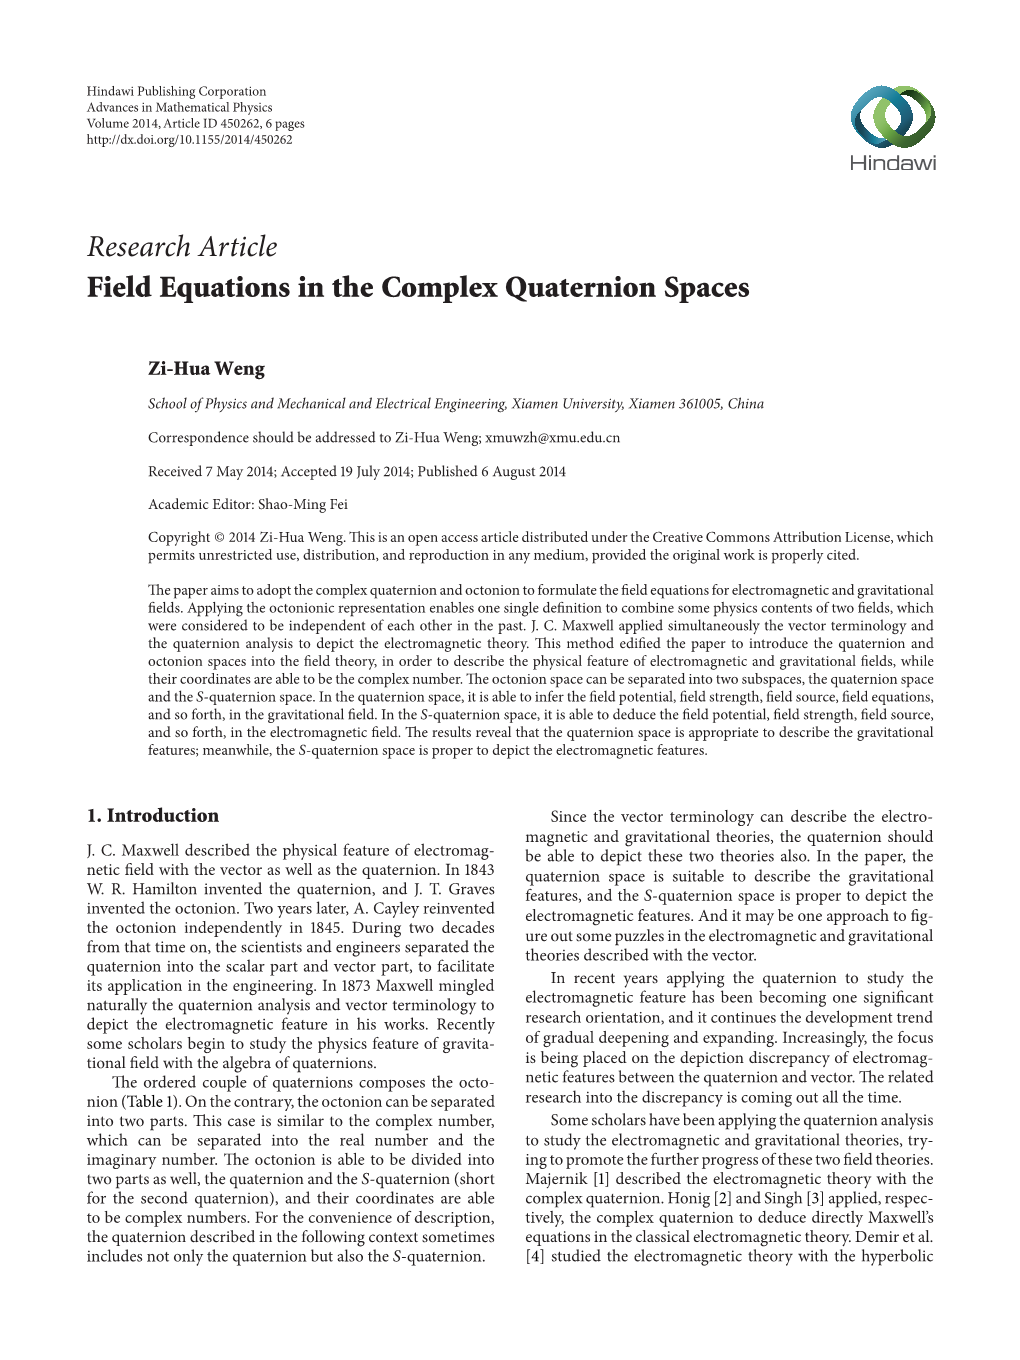 Field Equations in the Complex Quaternion Spaces